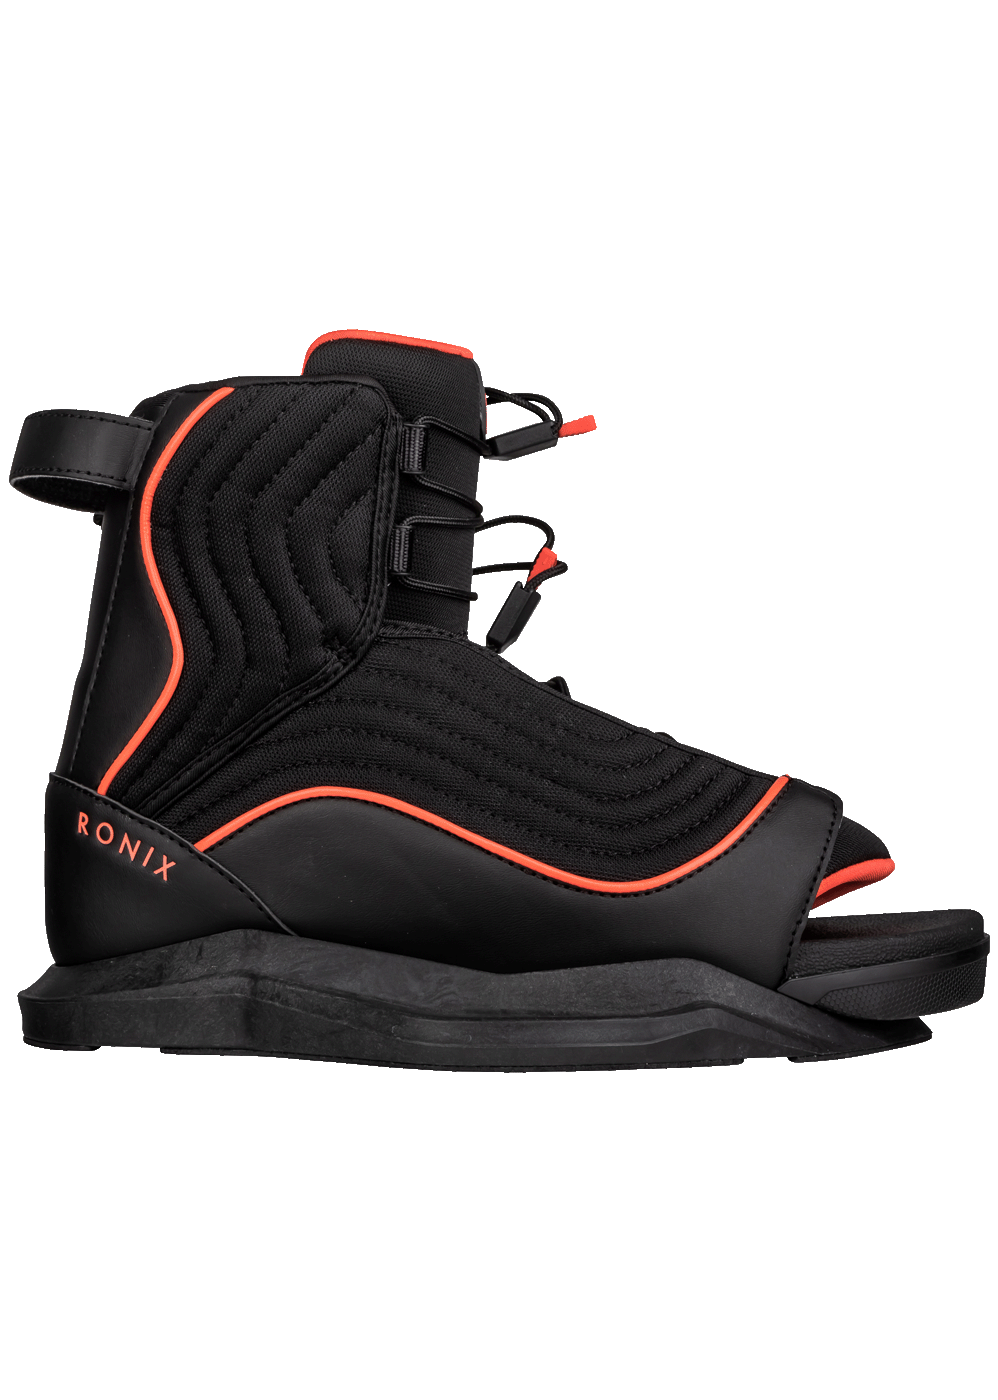 2022-RONIX-LUXE-RIGHT-LATERAL copy 2